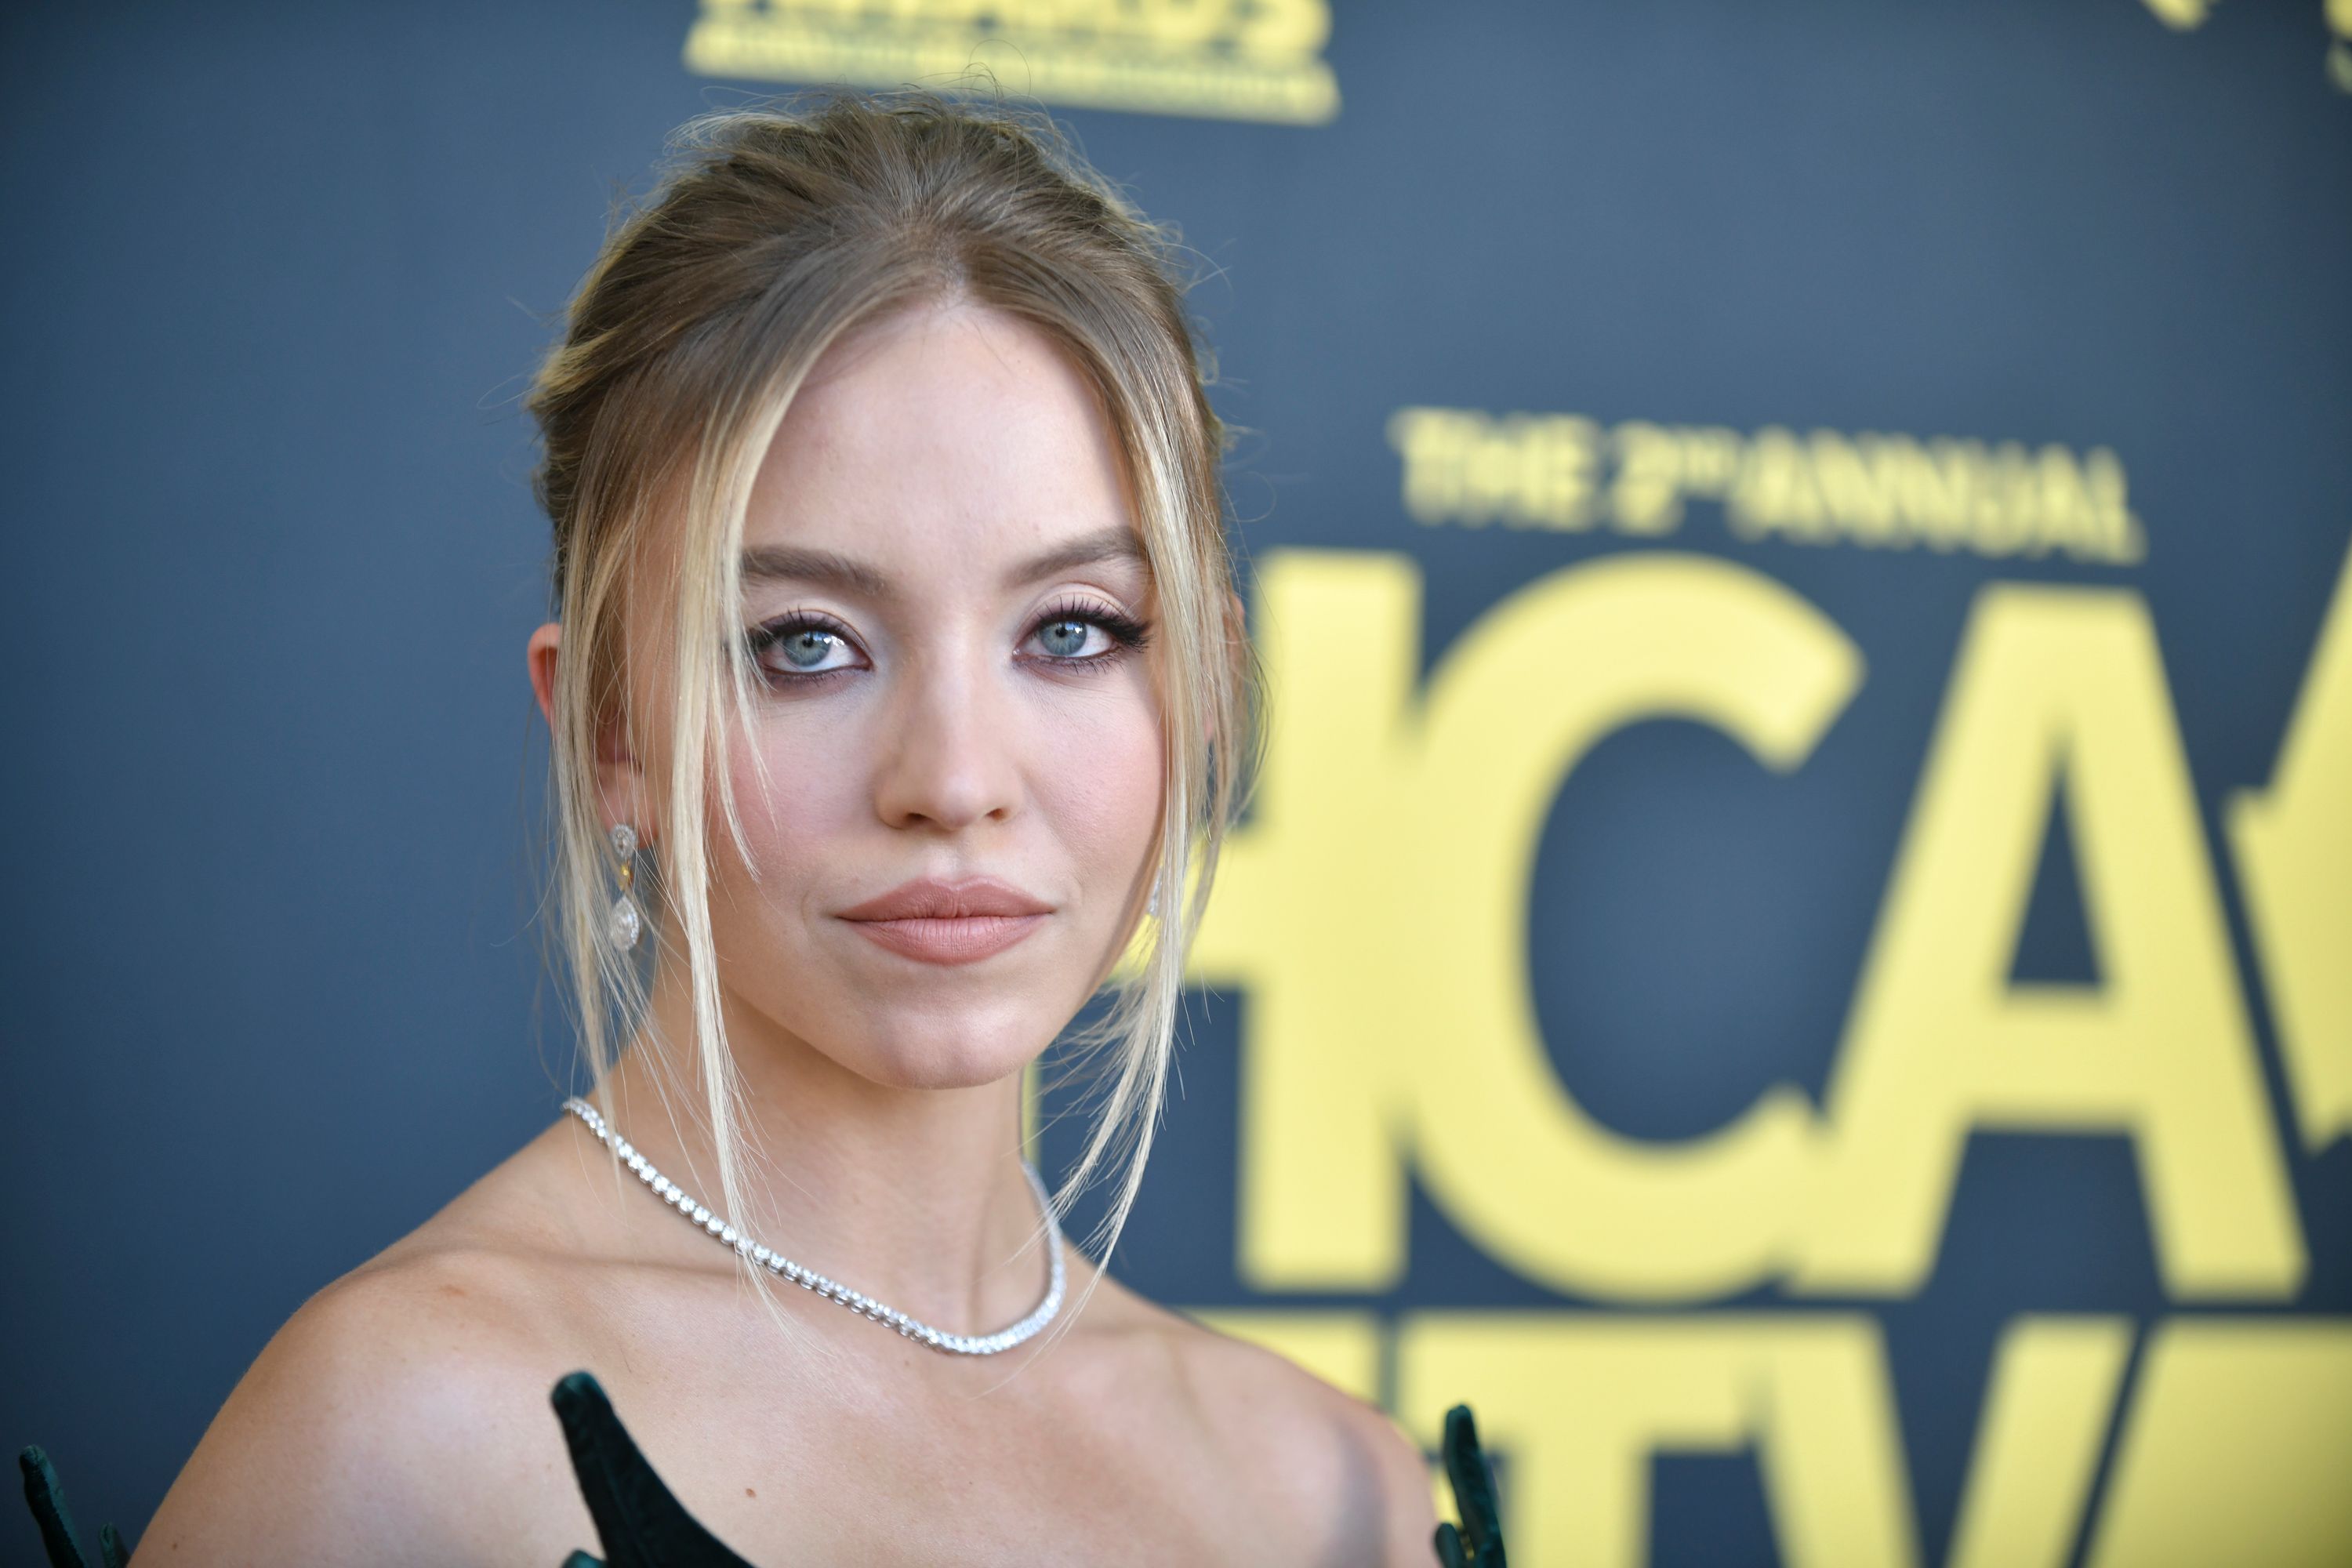 Sydney Sweeney Defends Family: 'Stop Making Assumptions'